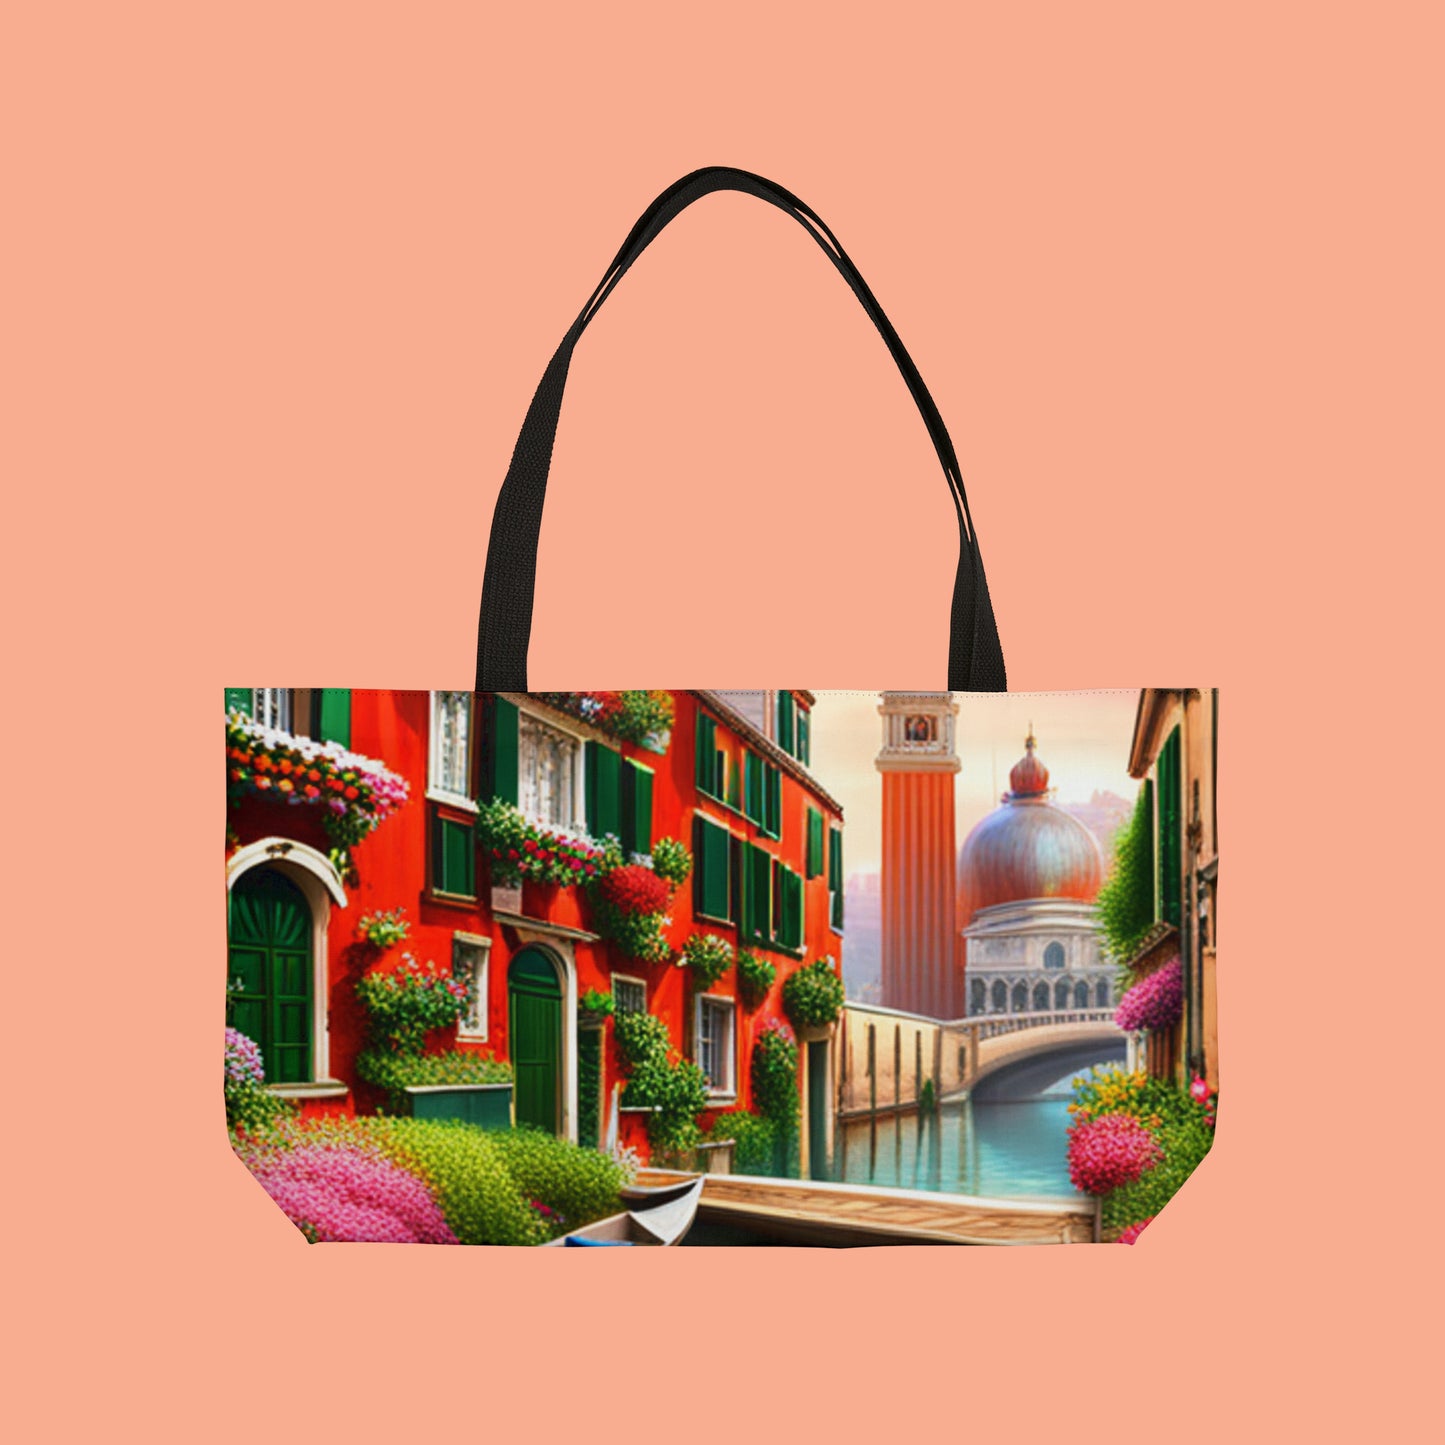 A design inspired by the very photogenic city of Venice, Italy on this Weekender Tote Bag.